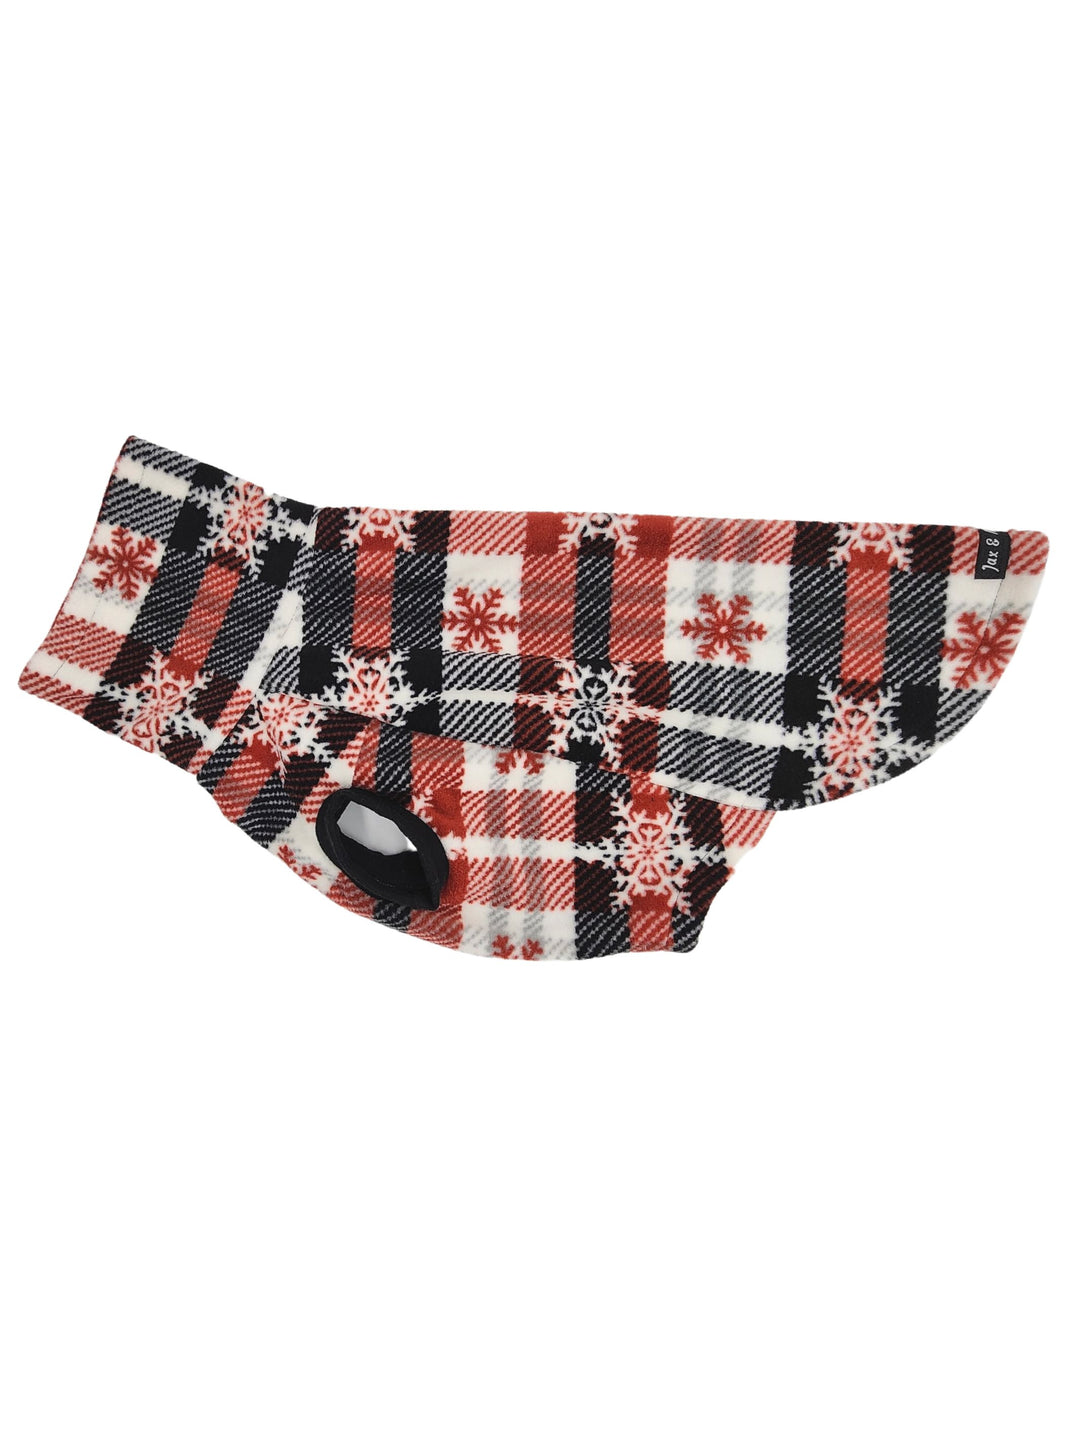 Jax & Molly's Triflurry Dog Sweater in red, white and black plaid with snowflake print